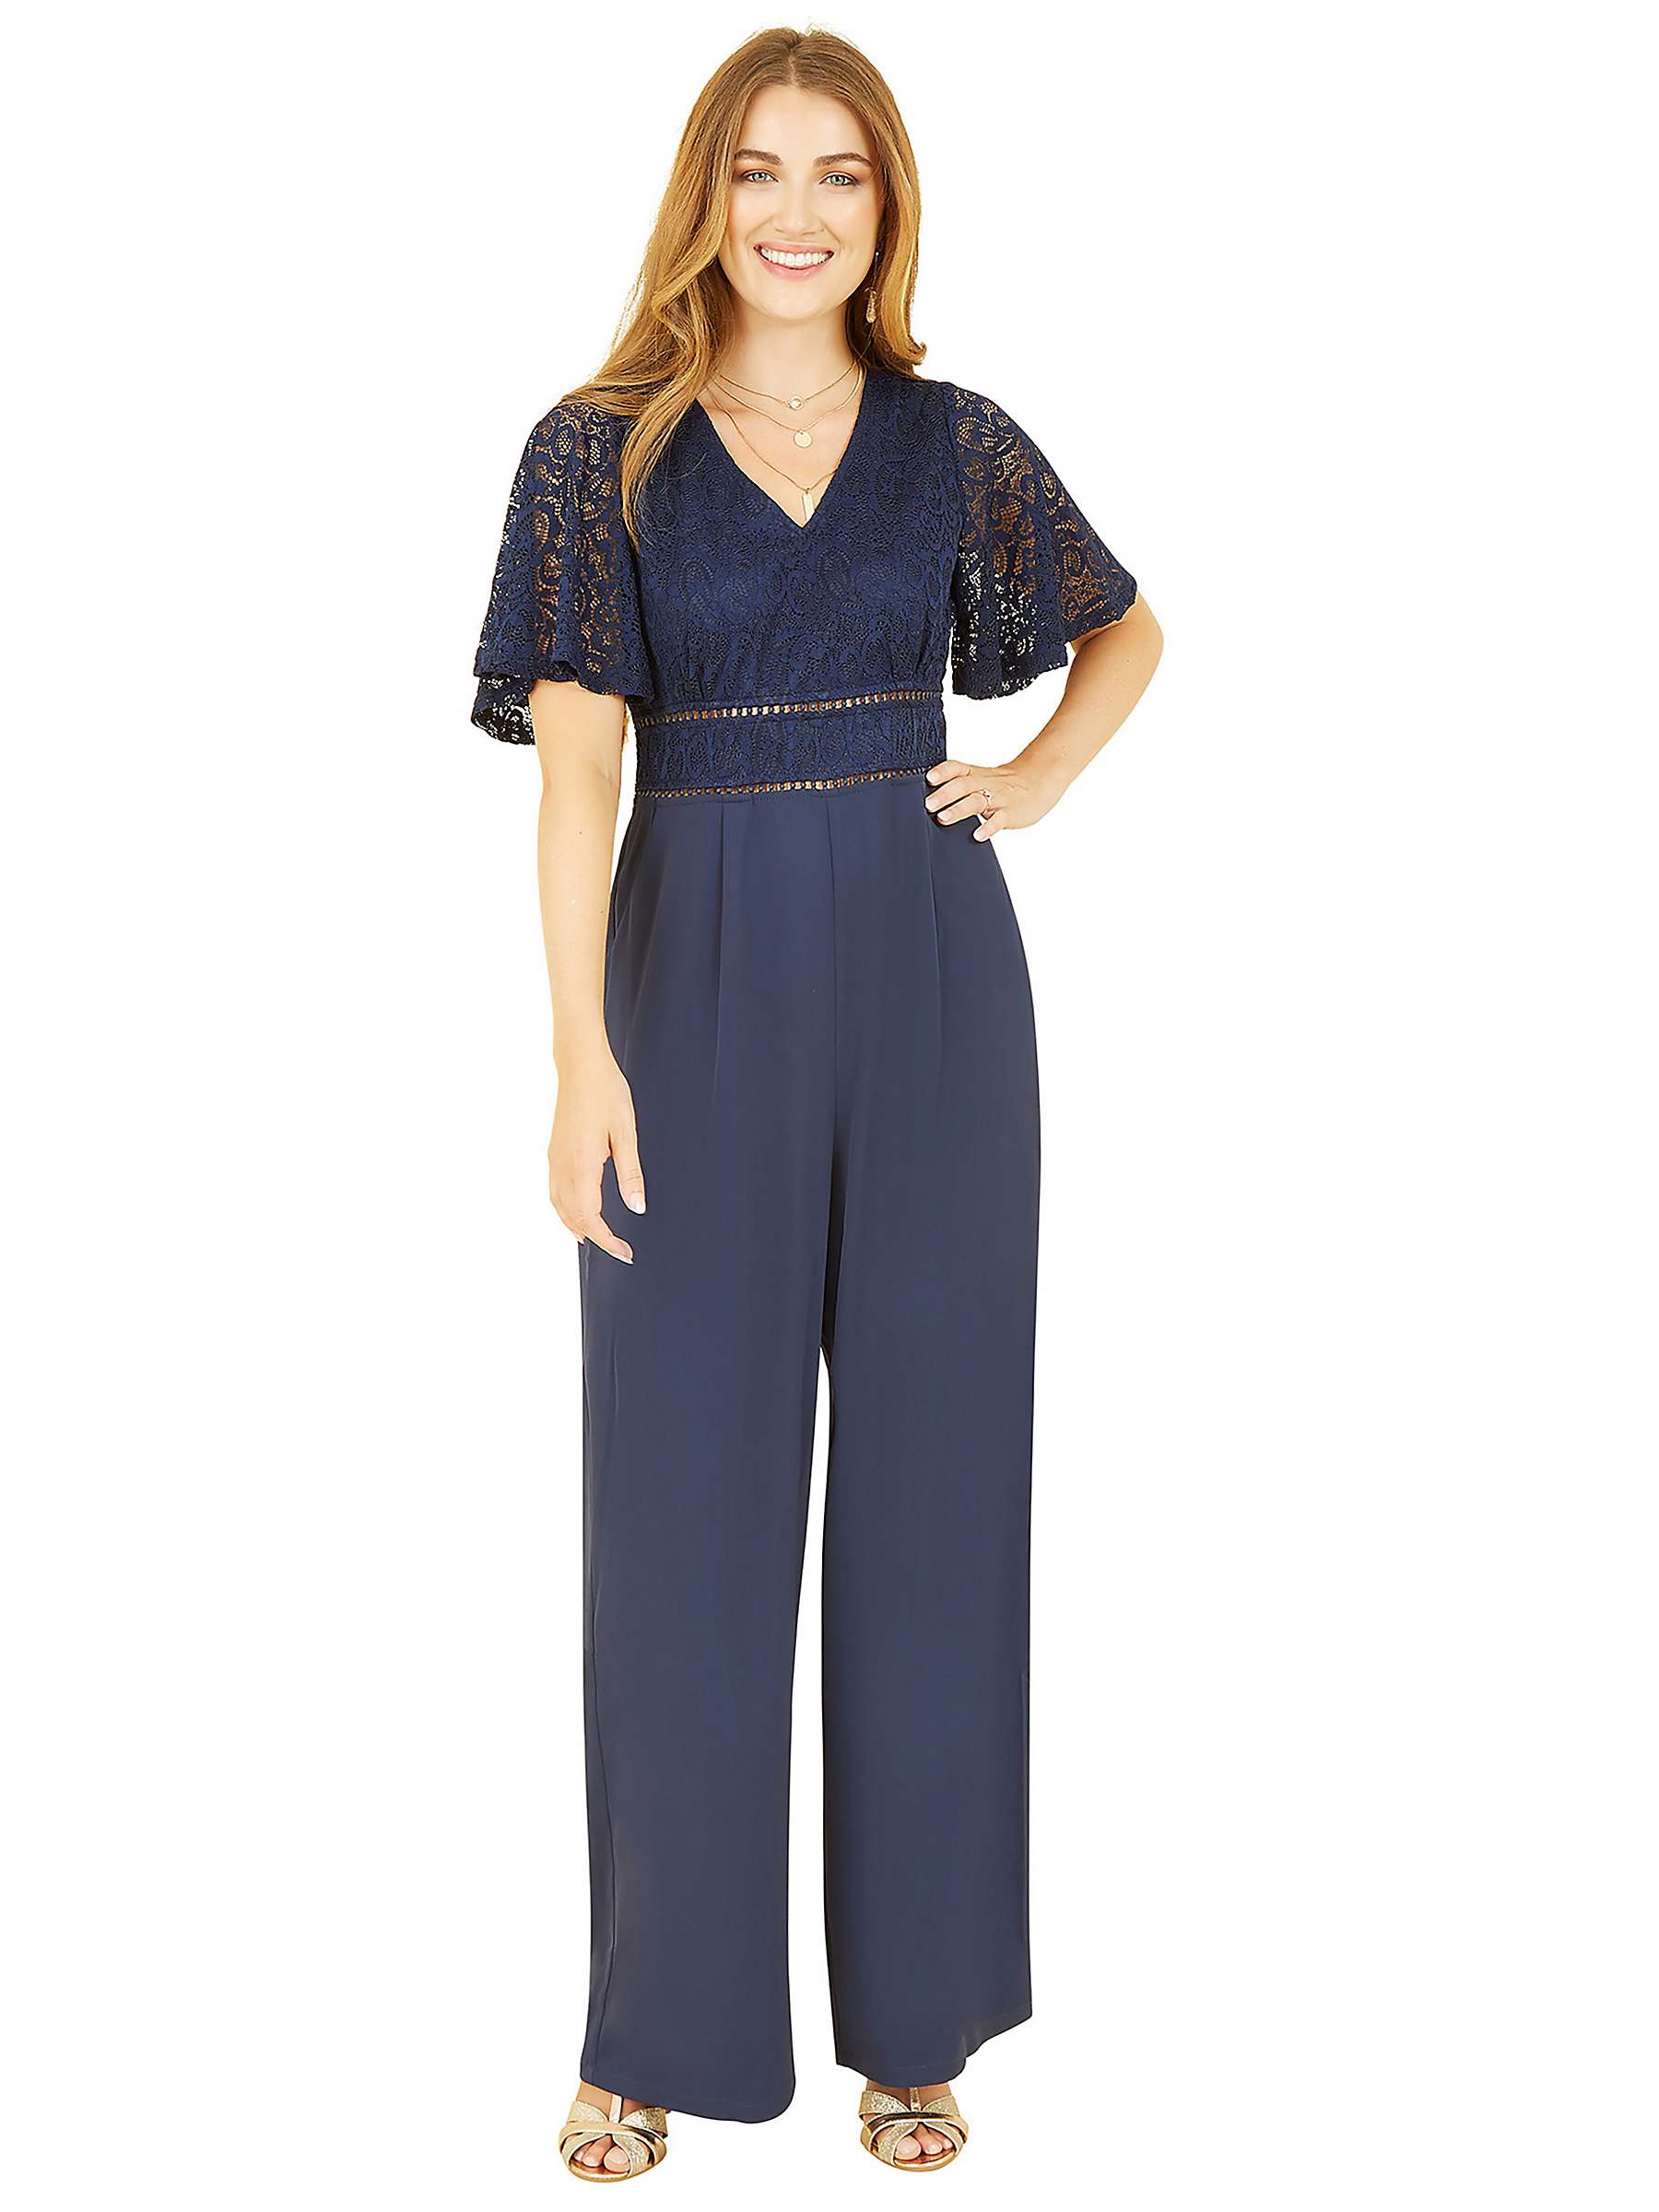 Buy Yumi Lace Bodice Wrap Jumpsuit, Navy Online at johnlewis.com